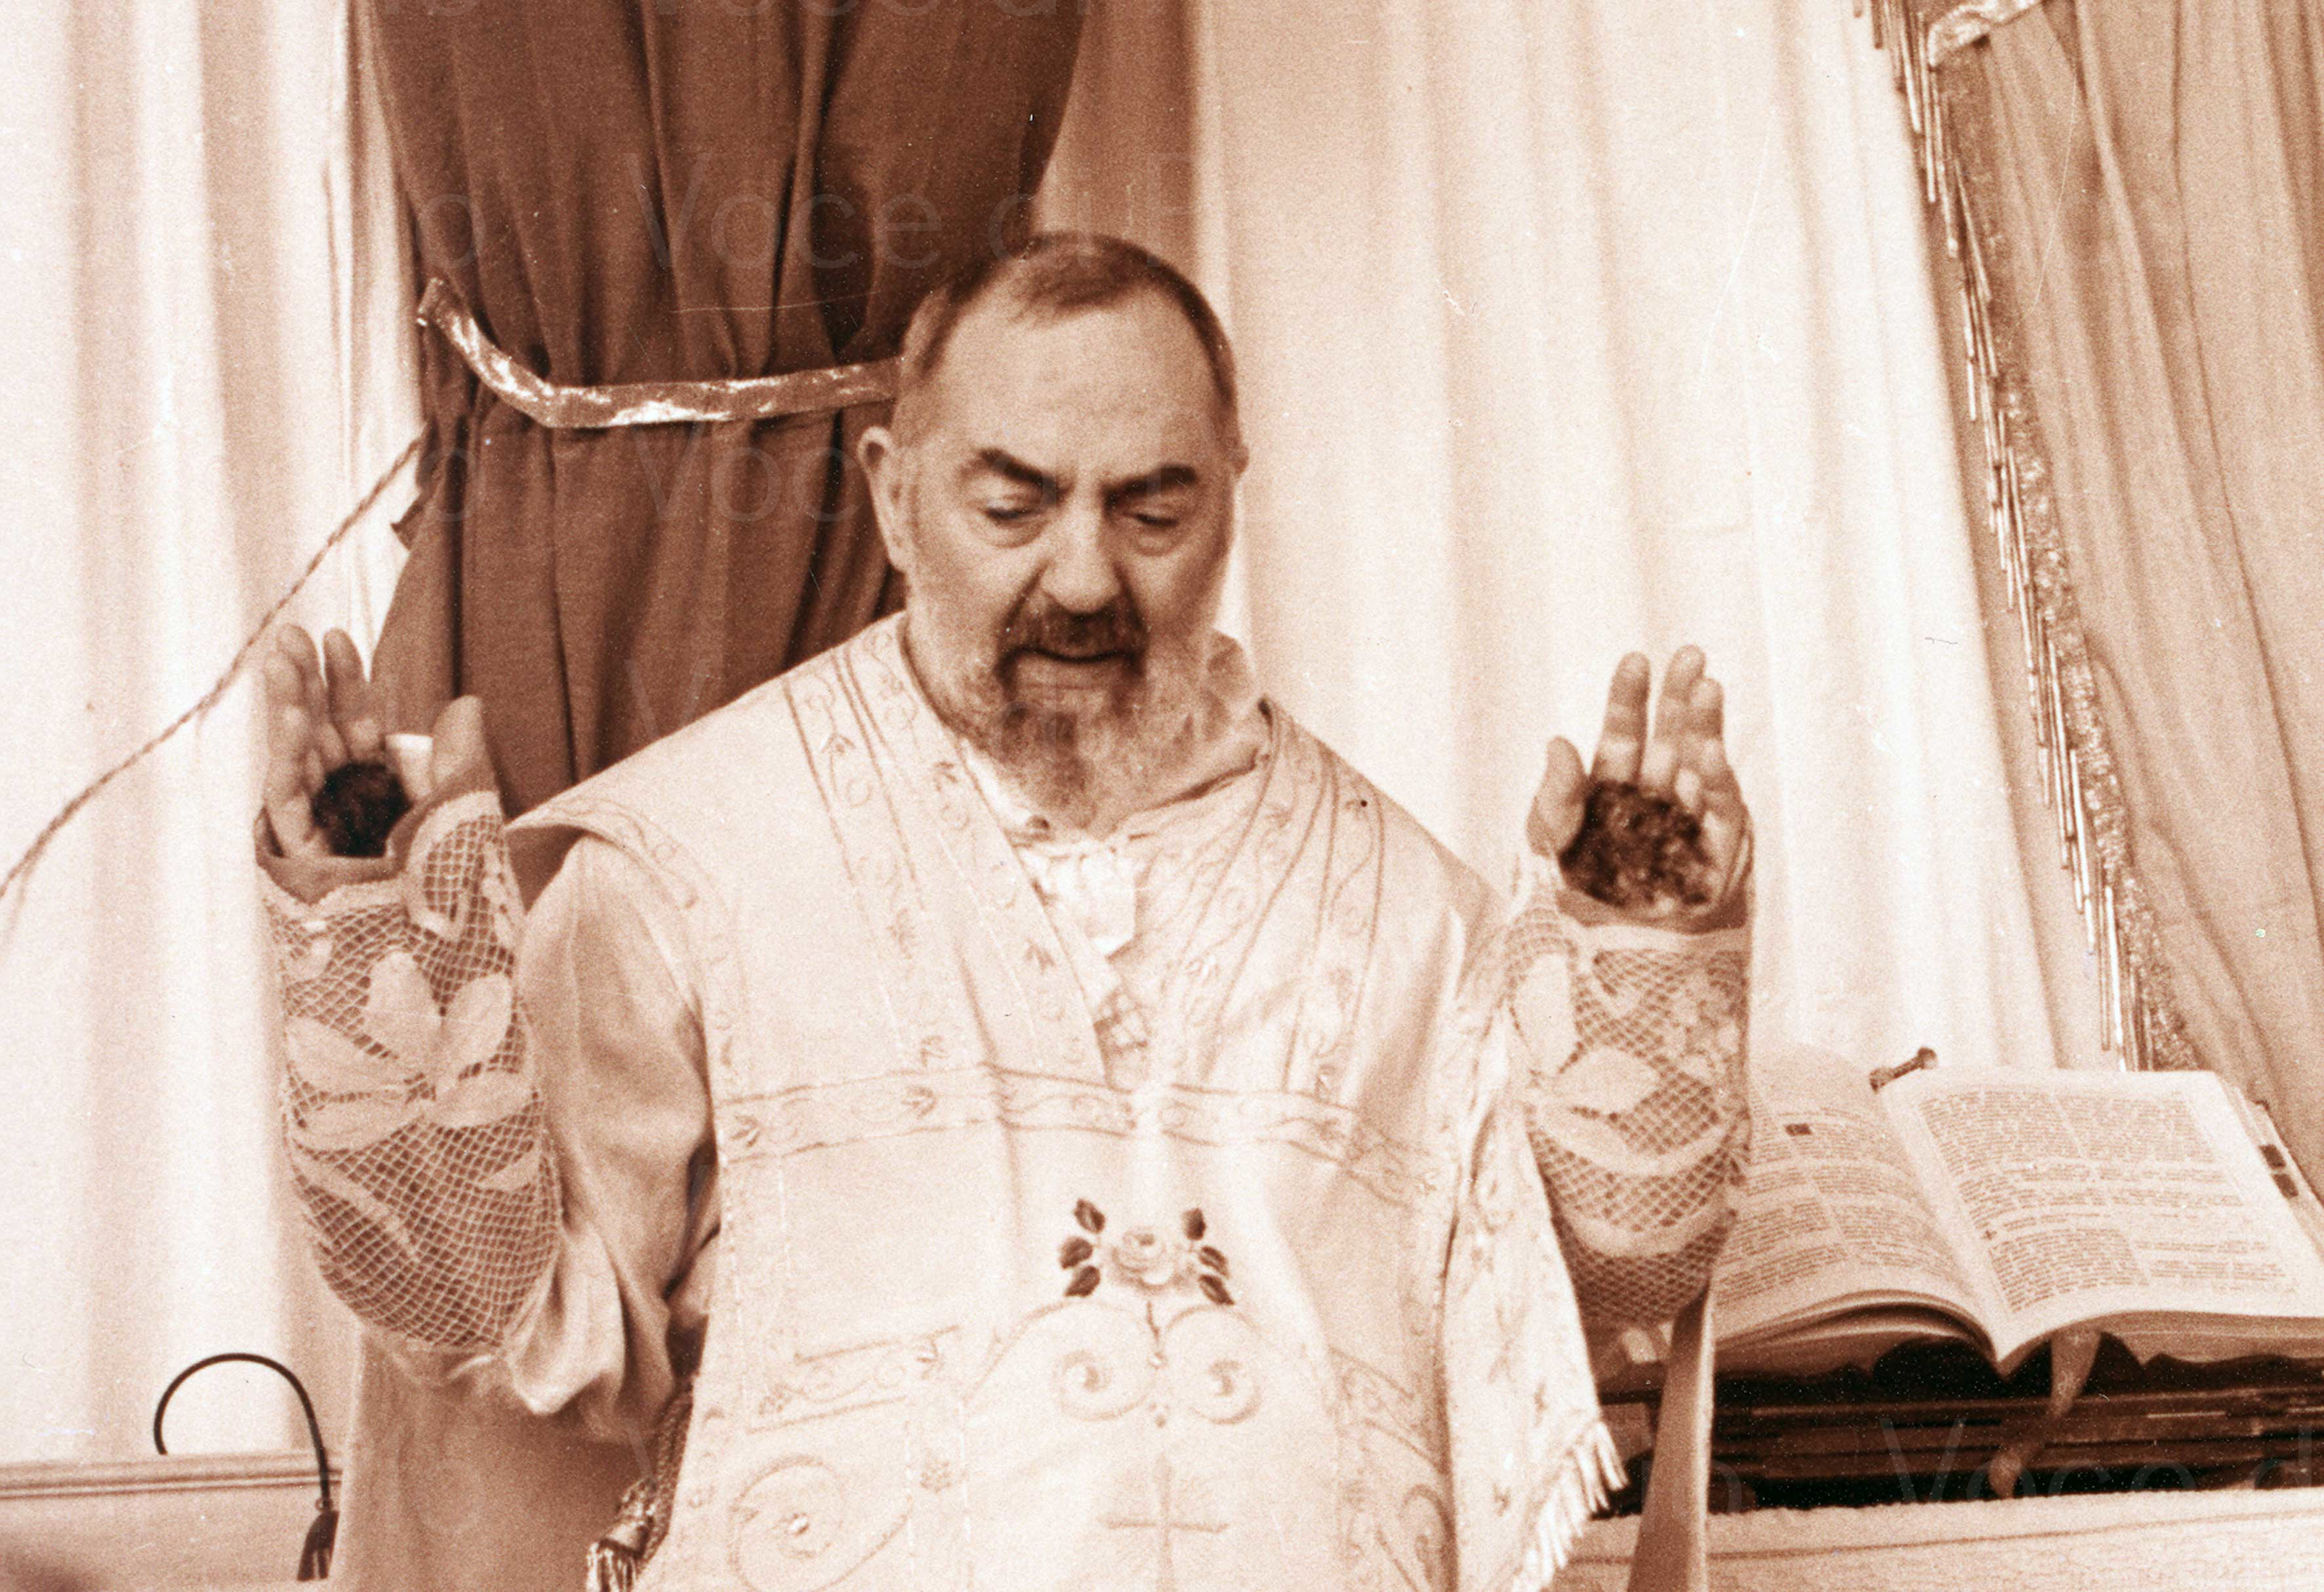 Padre giapponese